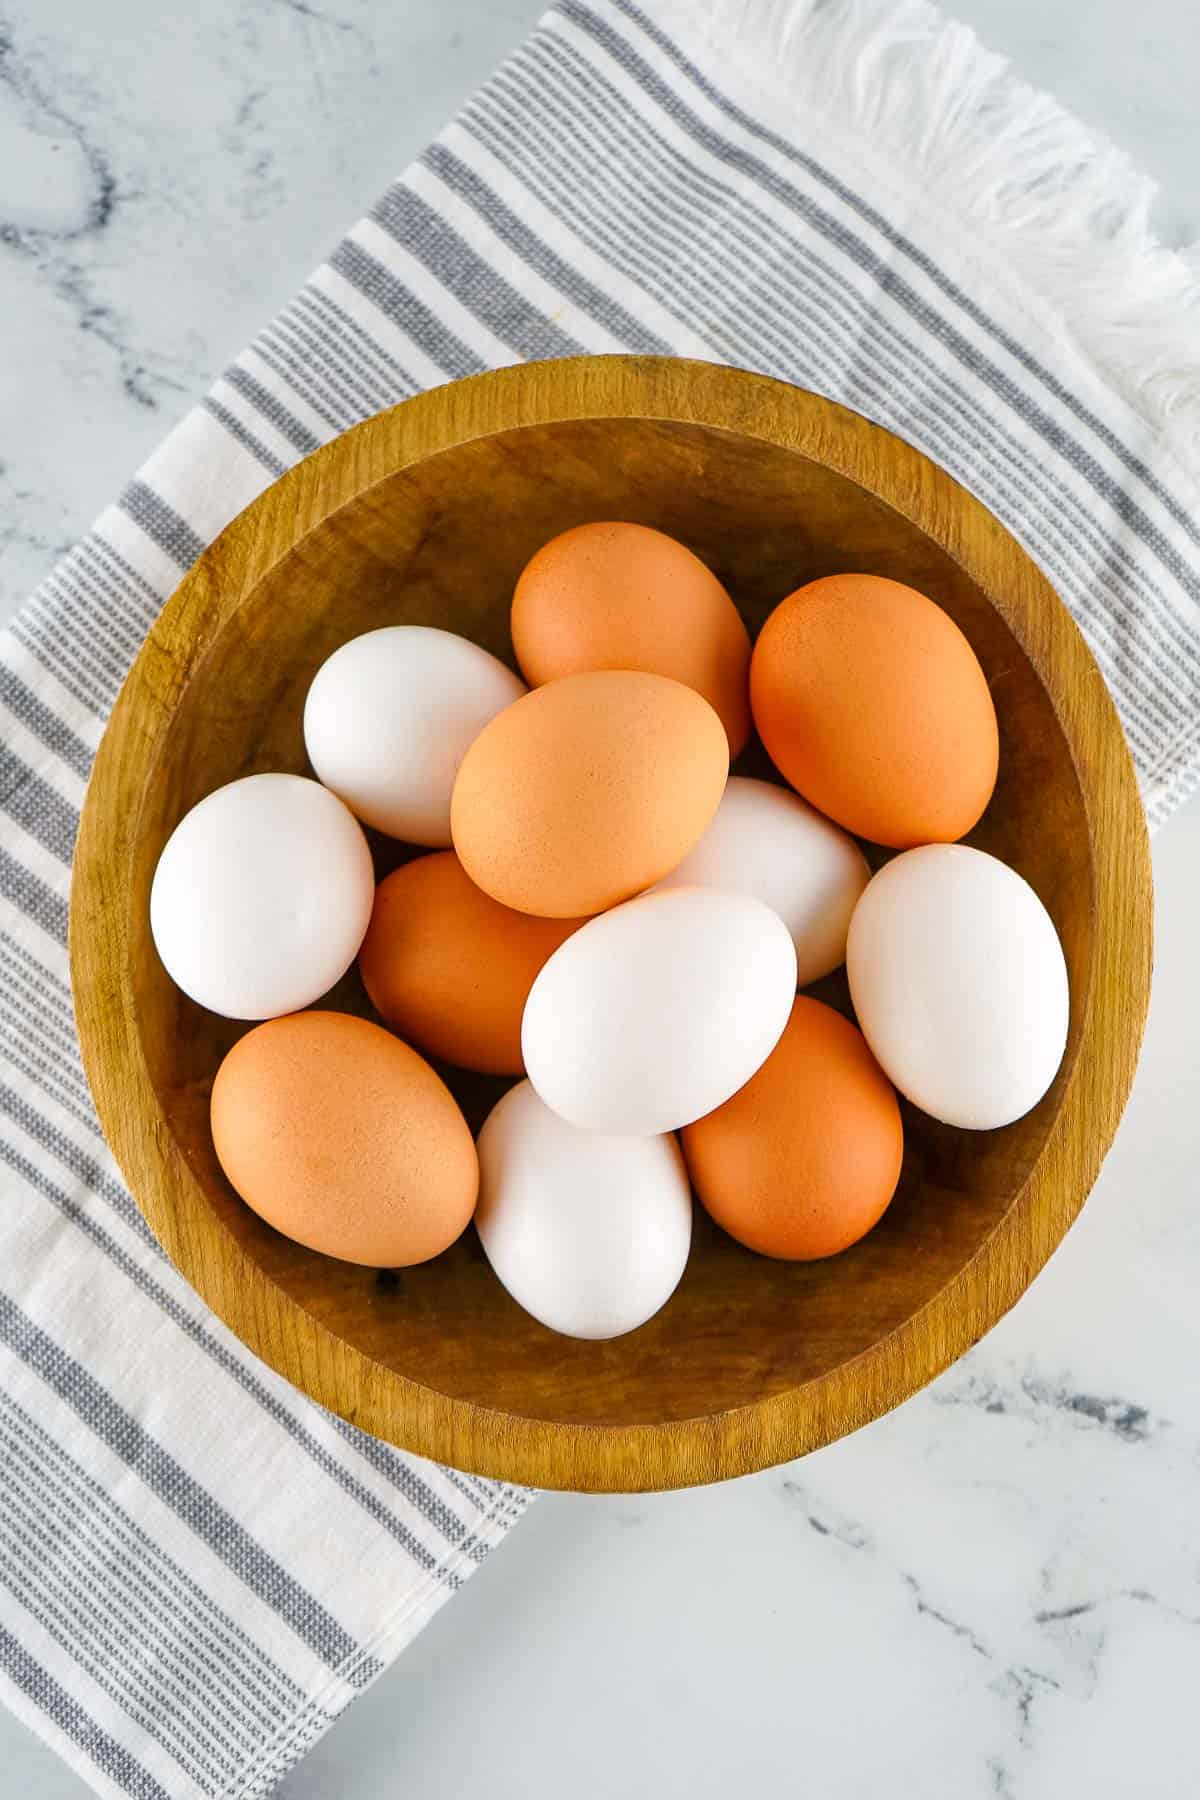 eggs in a wooden bowl